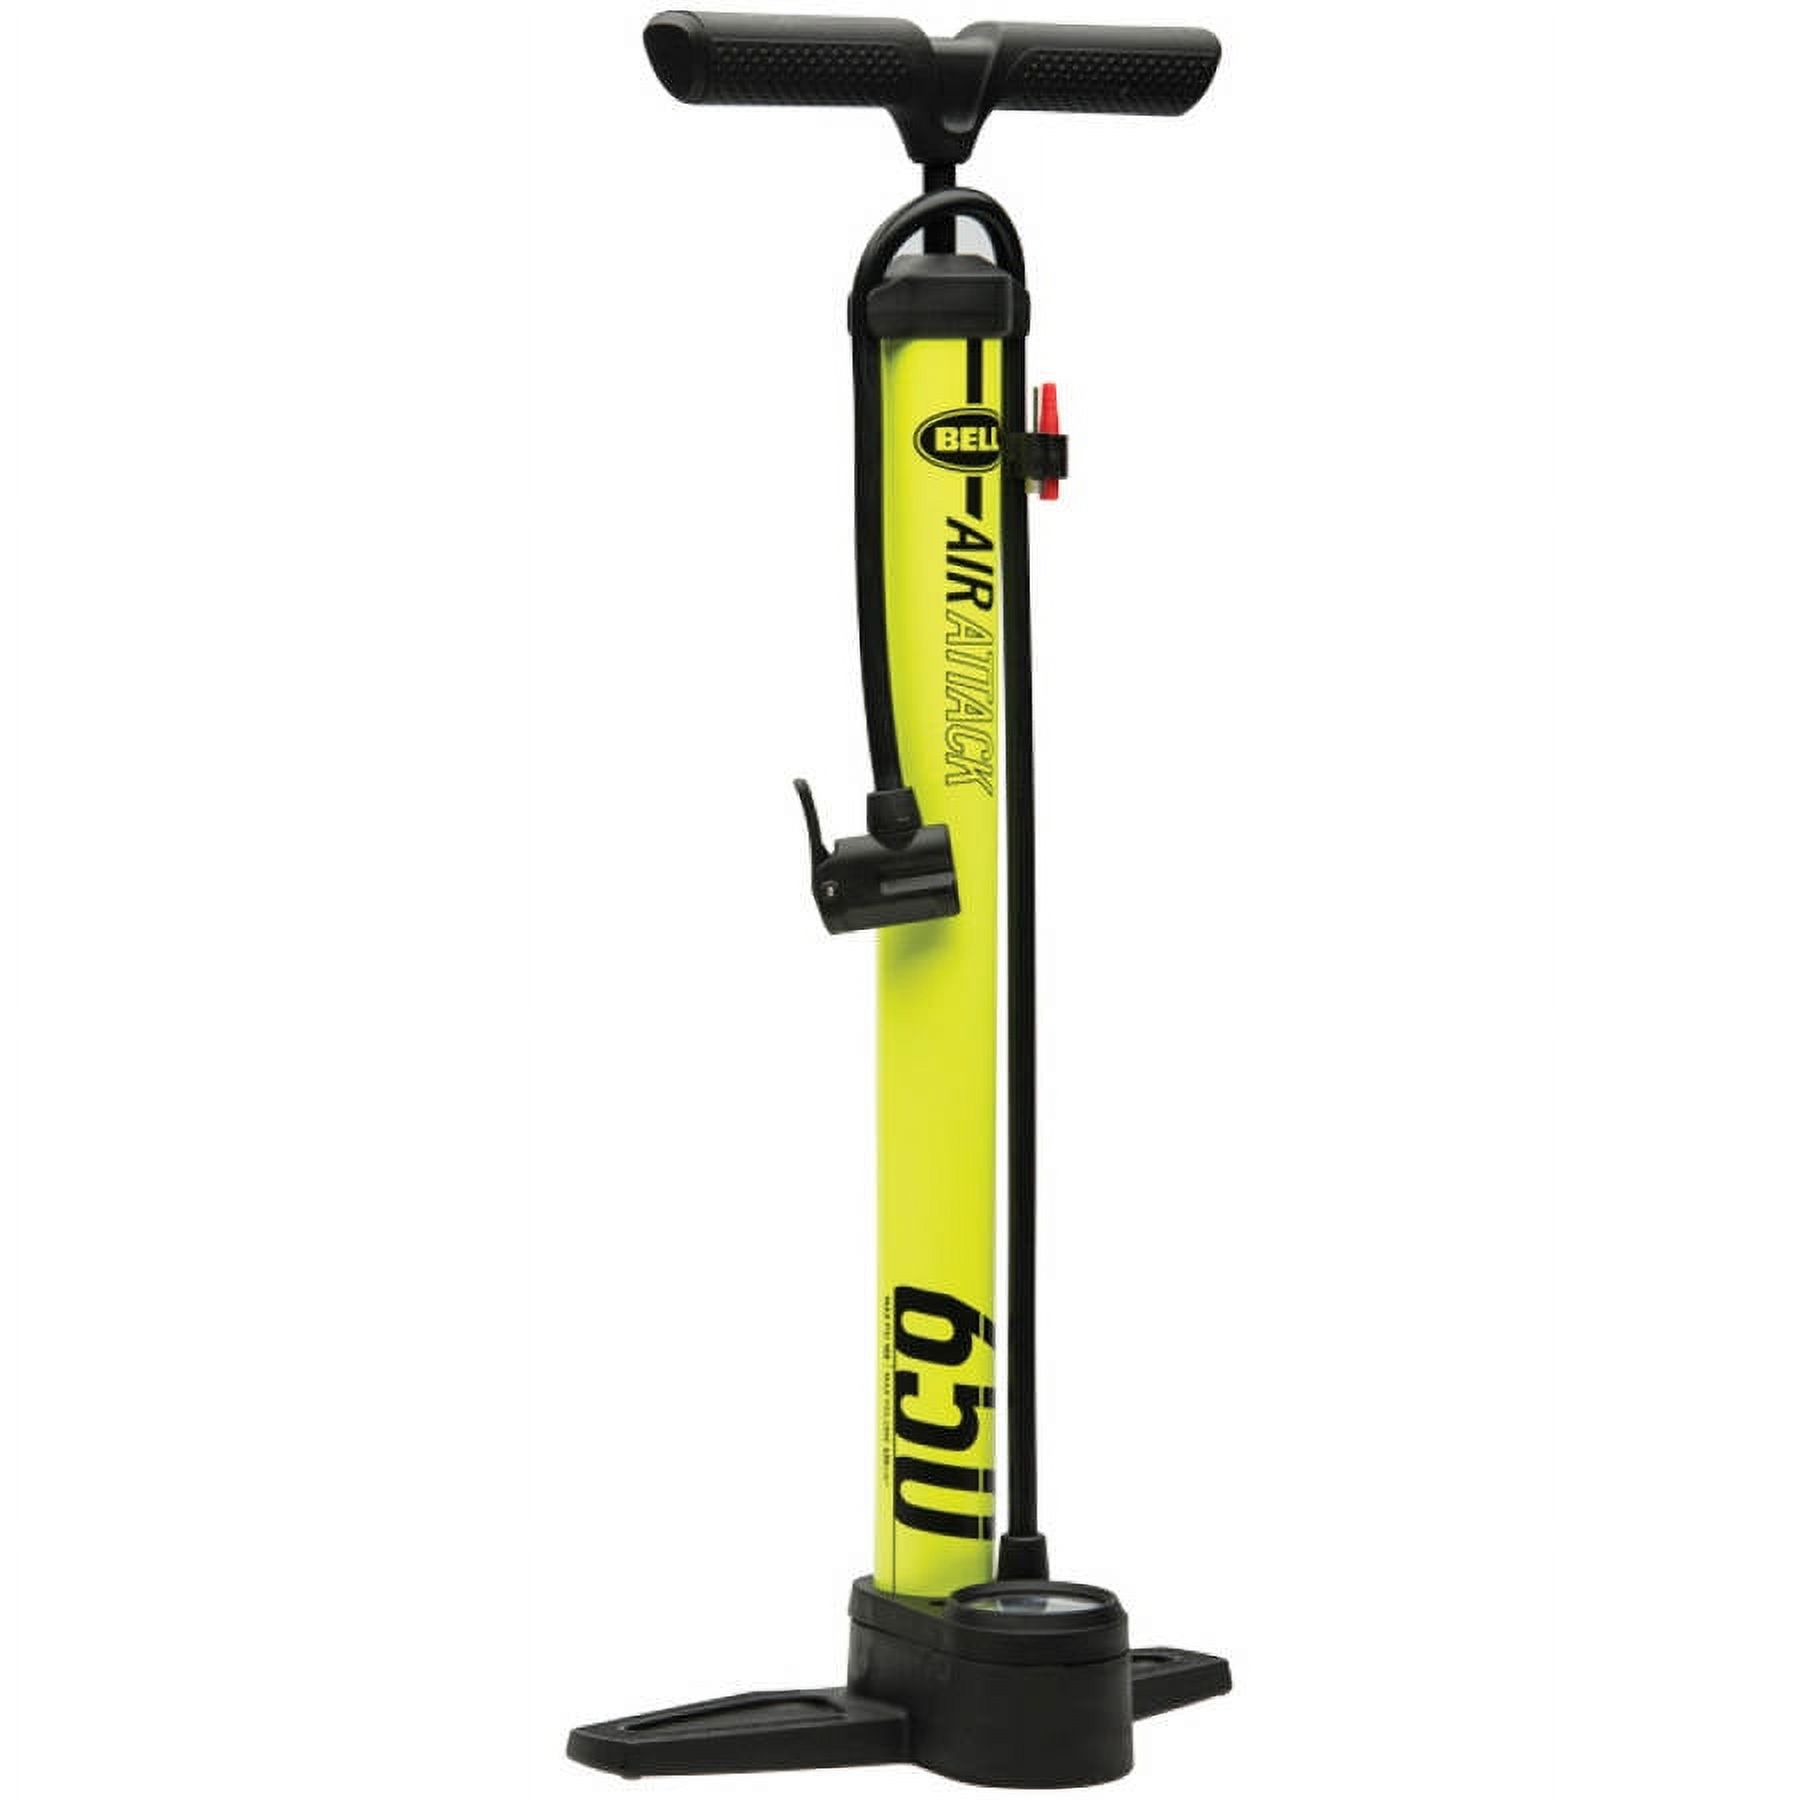 Bell Sports Air Attack 650 Floor Pump with Gauge, Yellow/Black - image 1 of 9